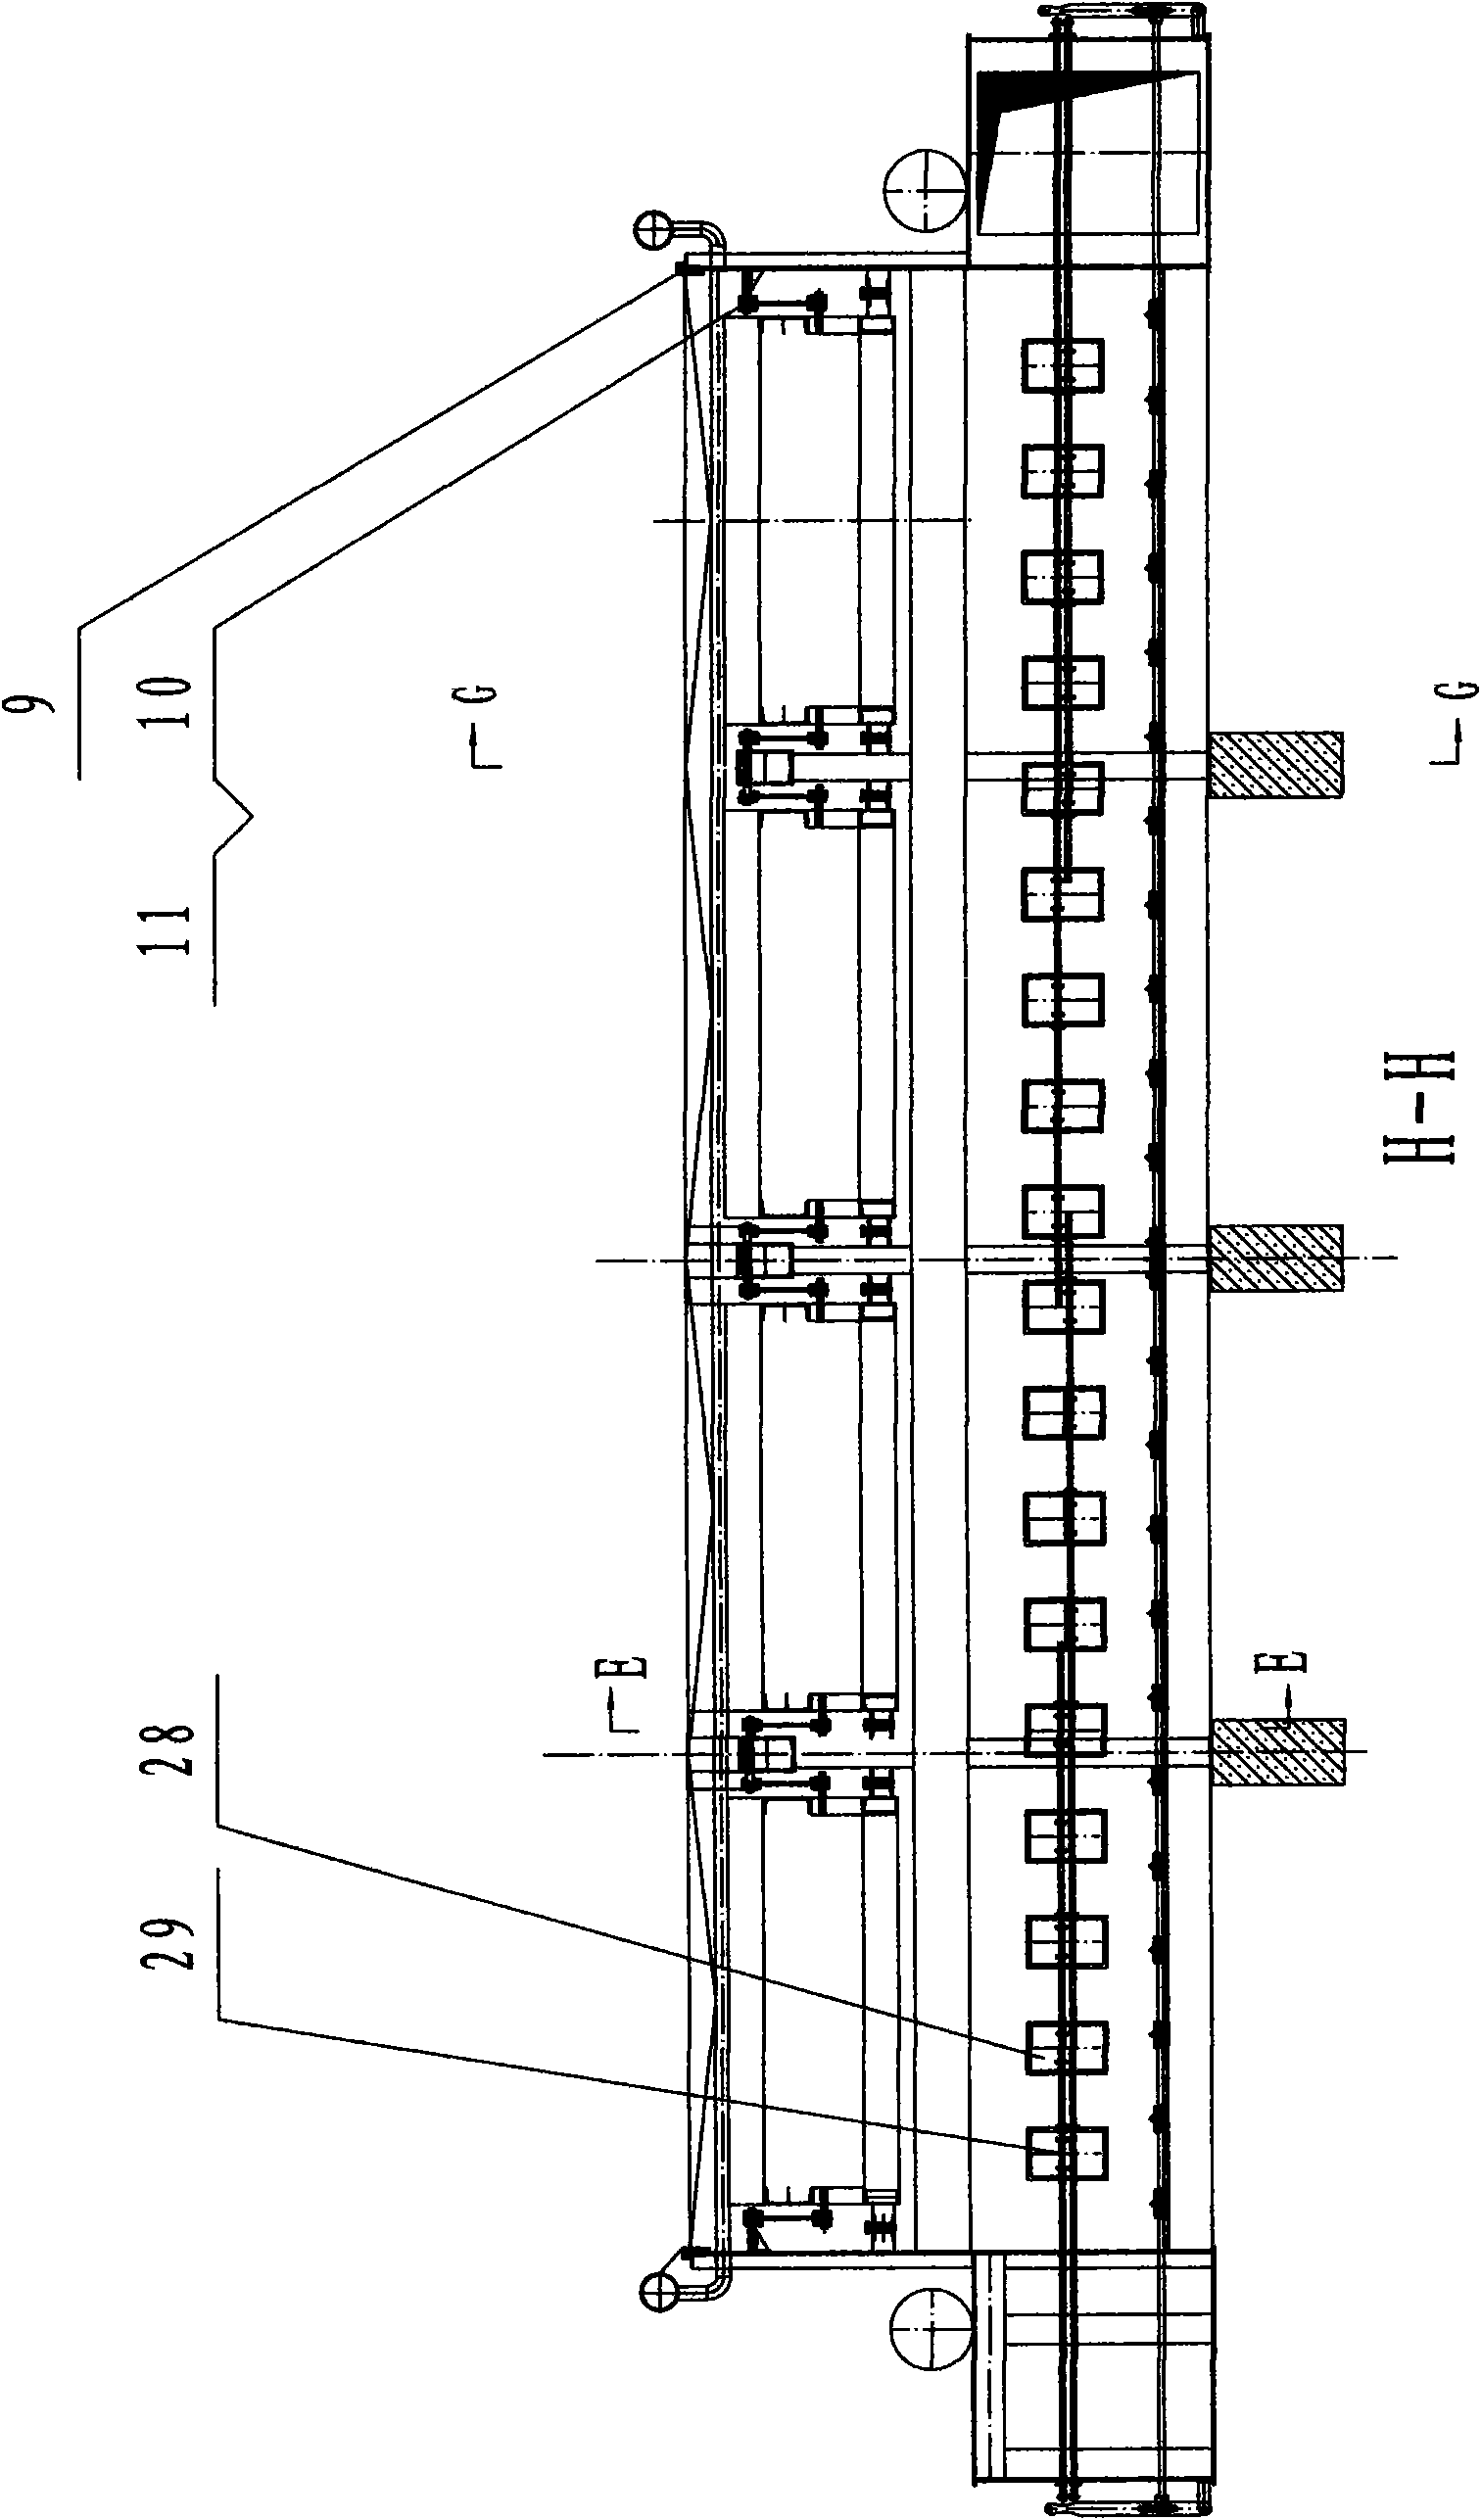 Isobaric air supplying and suspension active propelling unit for novel large reciprocating grate